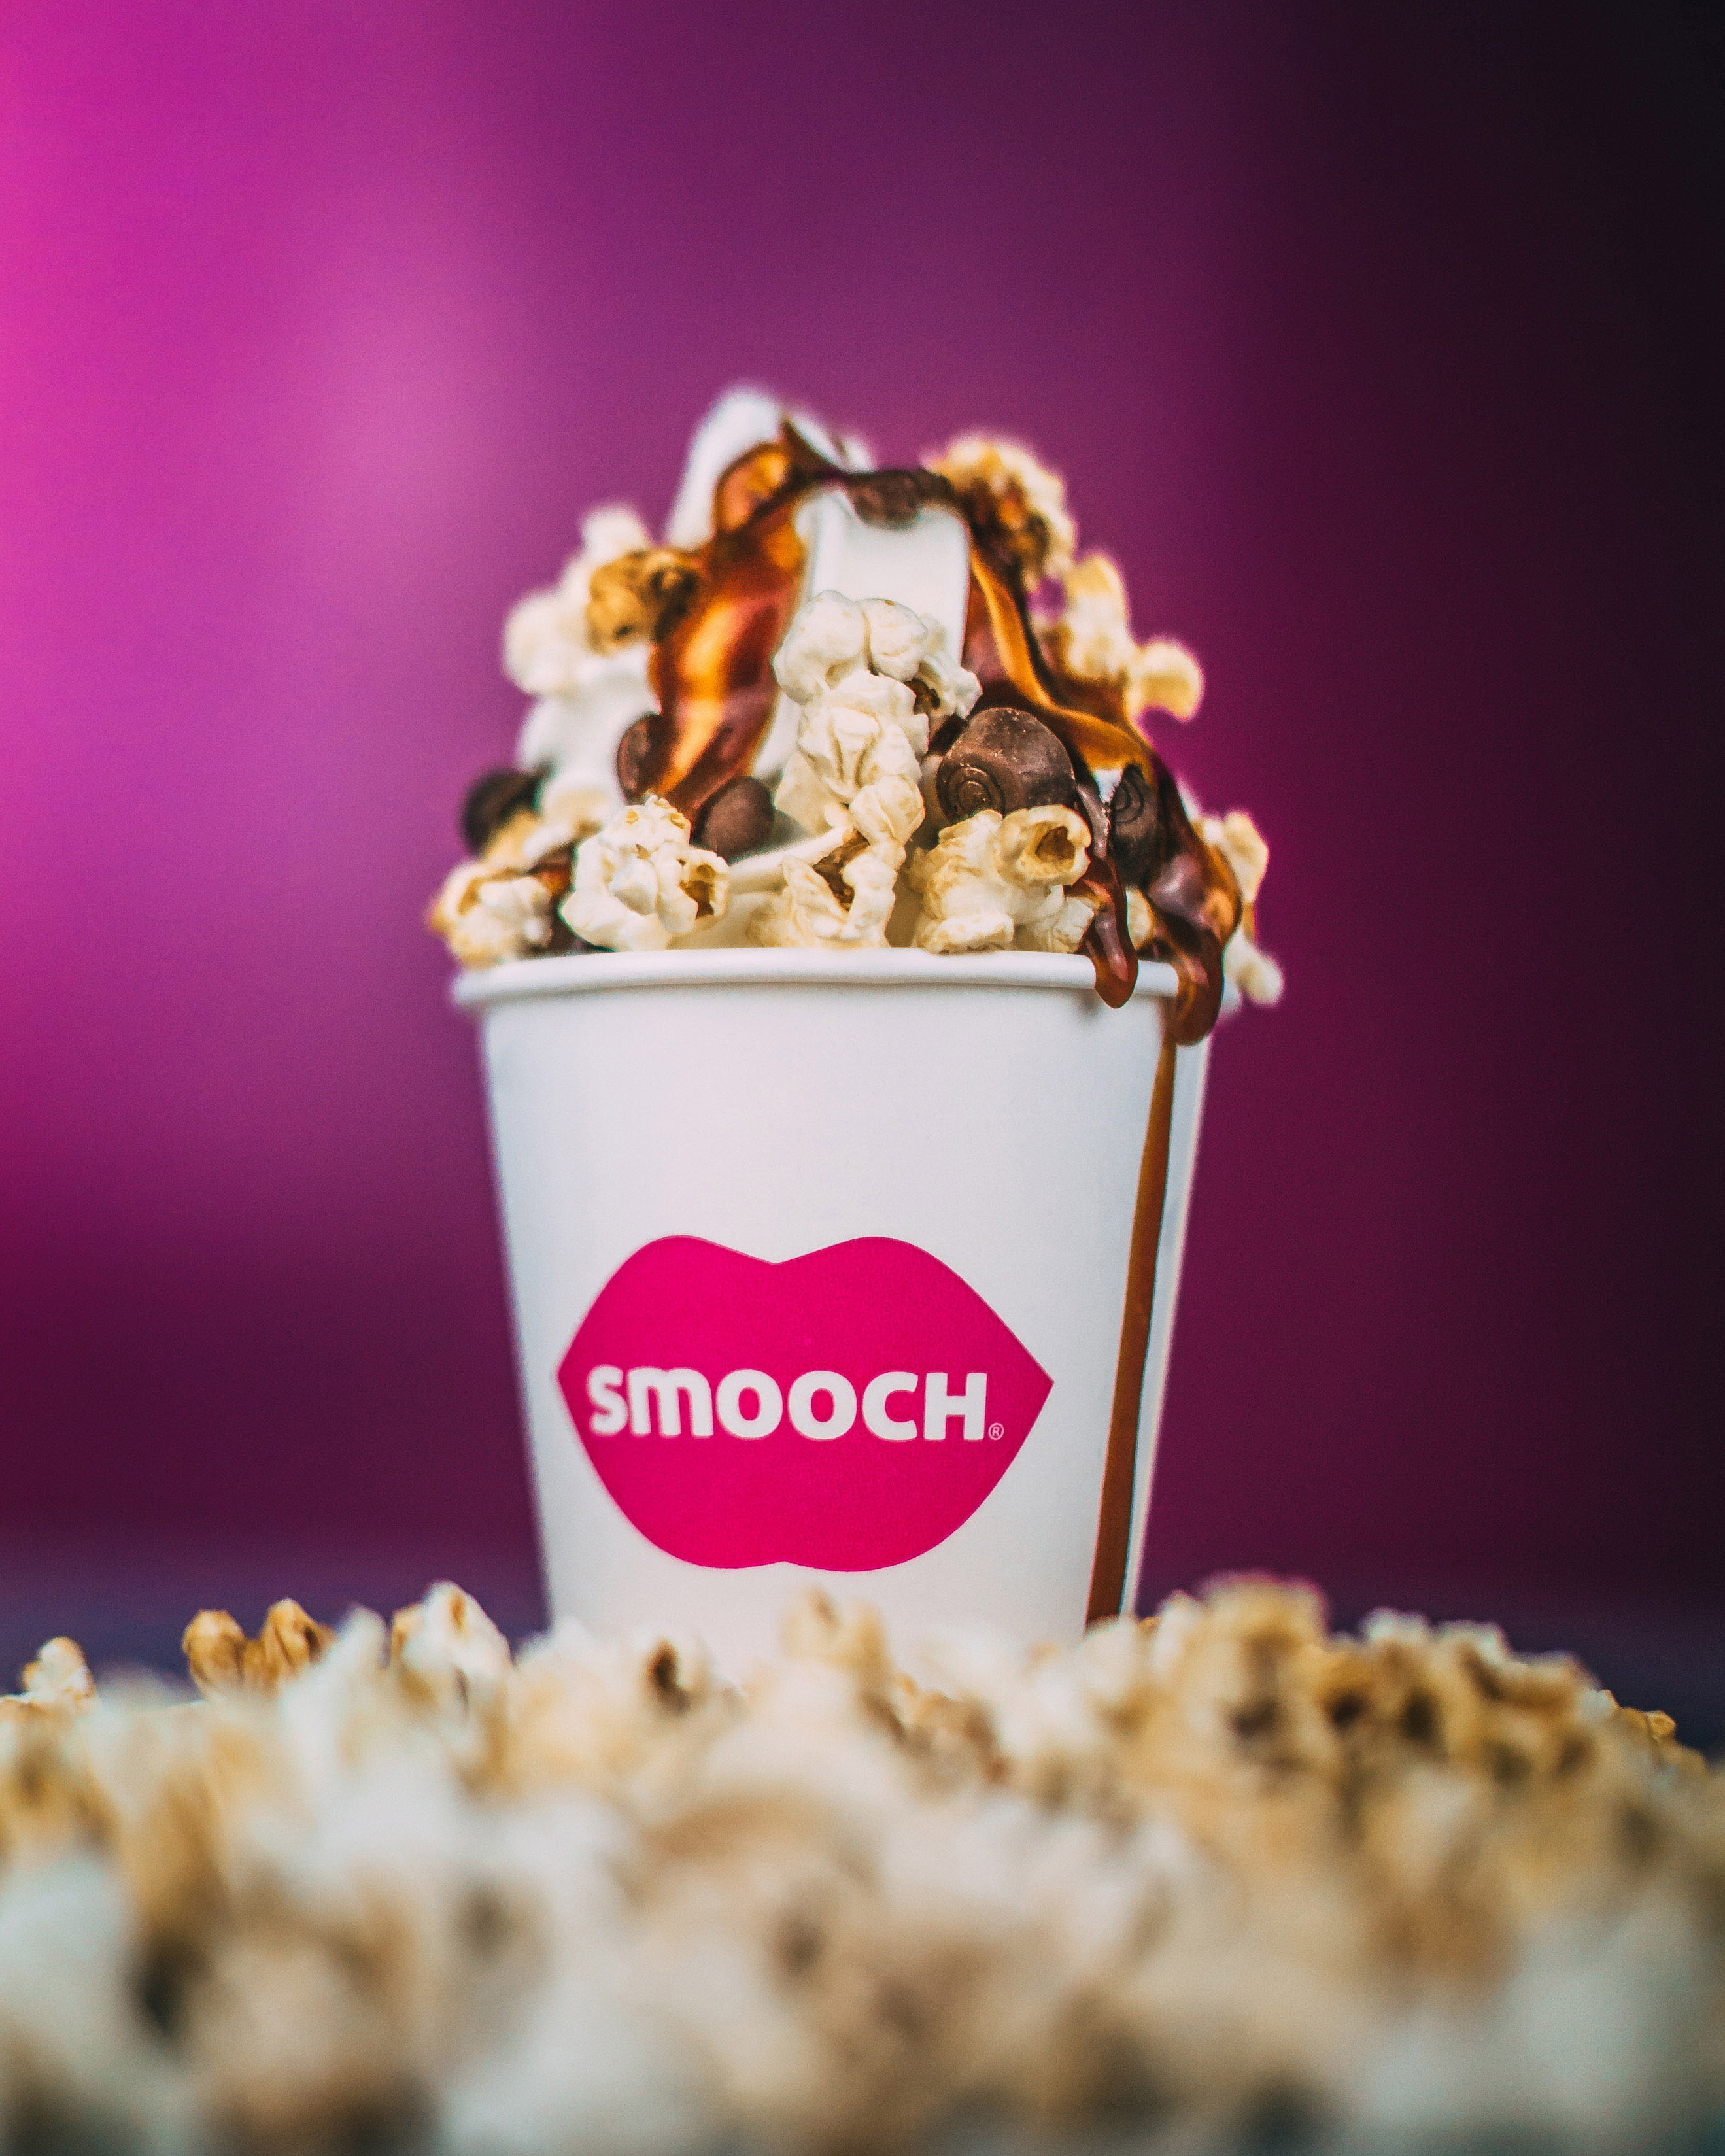 Real Irish dairy ice cream Smooch launch its new summer flavour Propercorn Salted Caramel Smooch (€3.50) available in shops around Ireland during the summer 2019.

For information please contact 
Mari O'Leary 016789888 - O'Leary PR